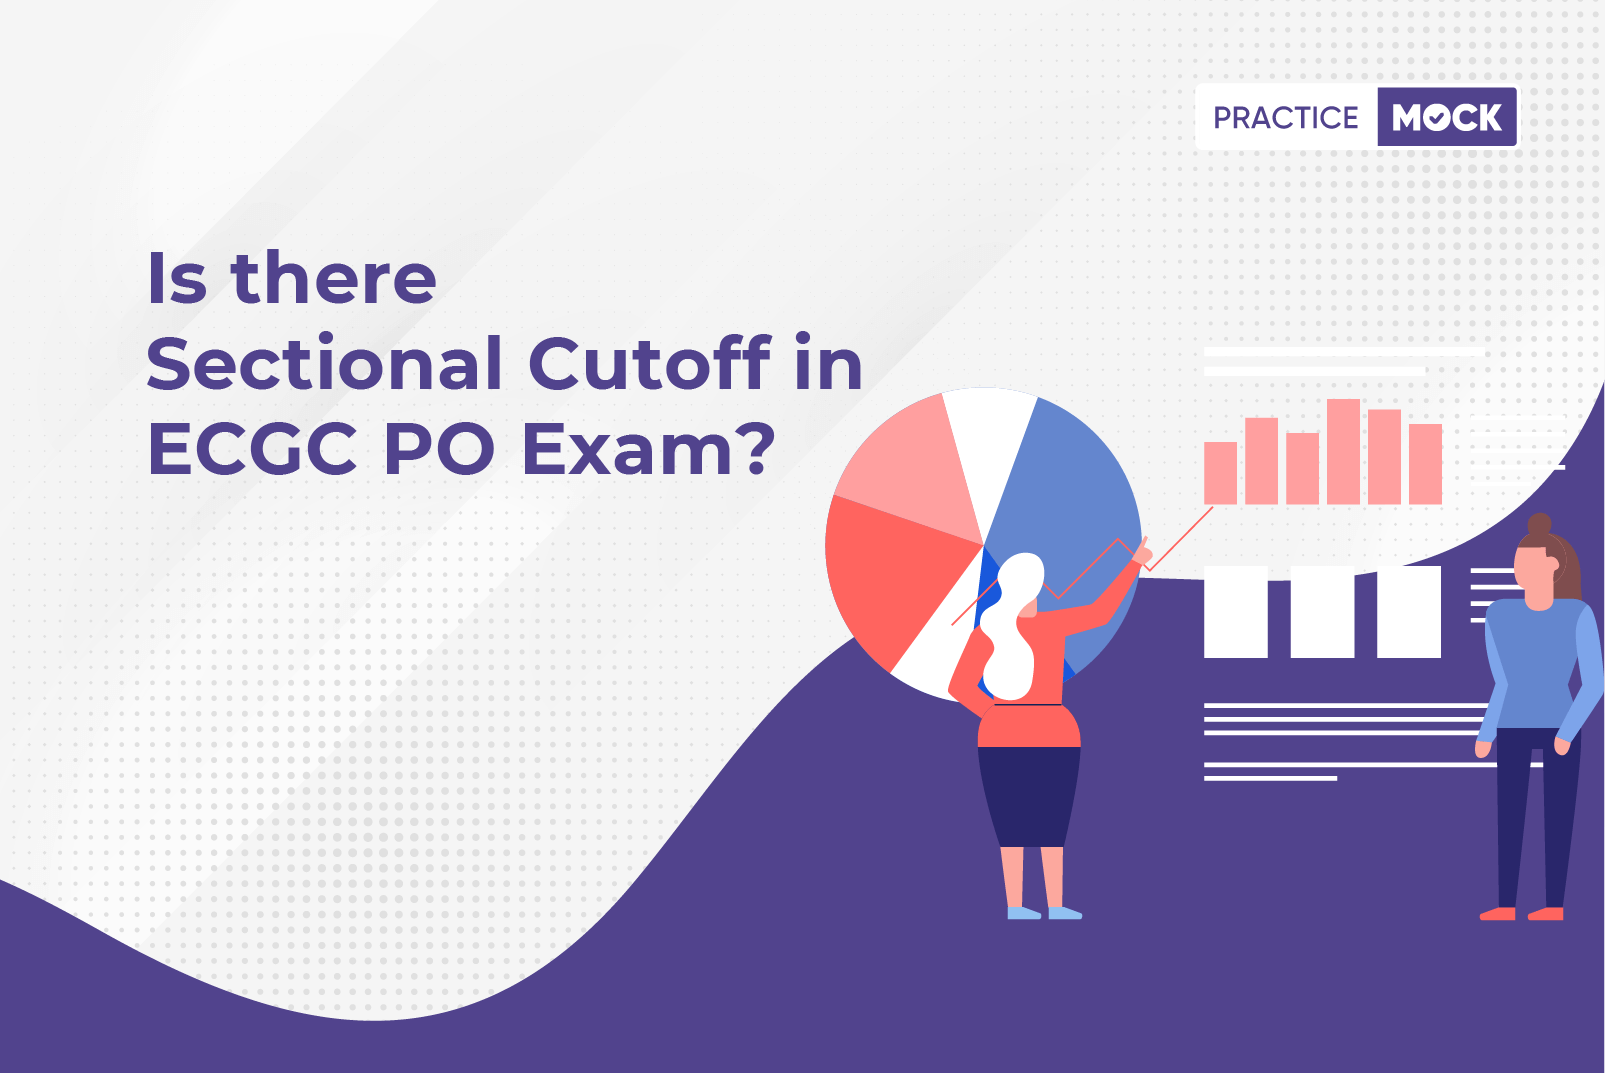 What will be the difficulty level of the ECGC PO 2022 exam?